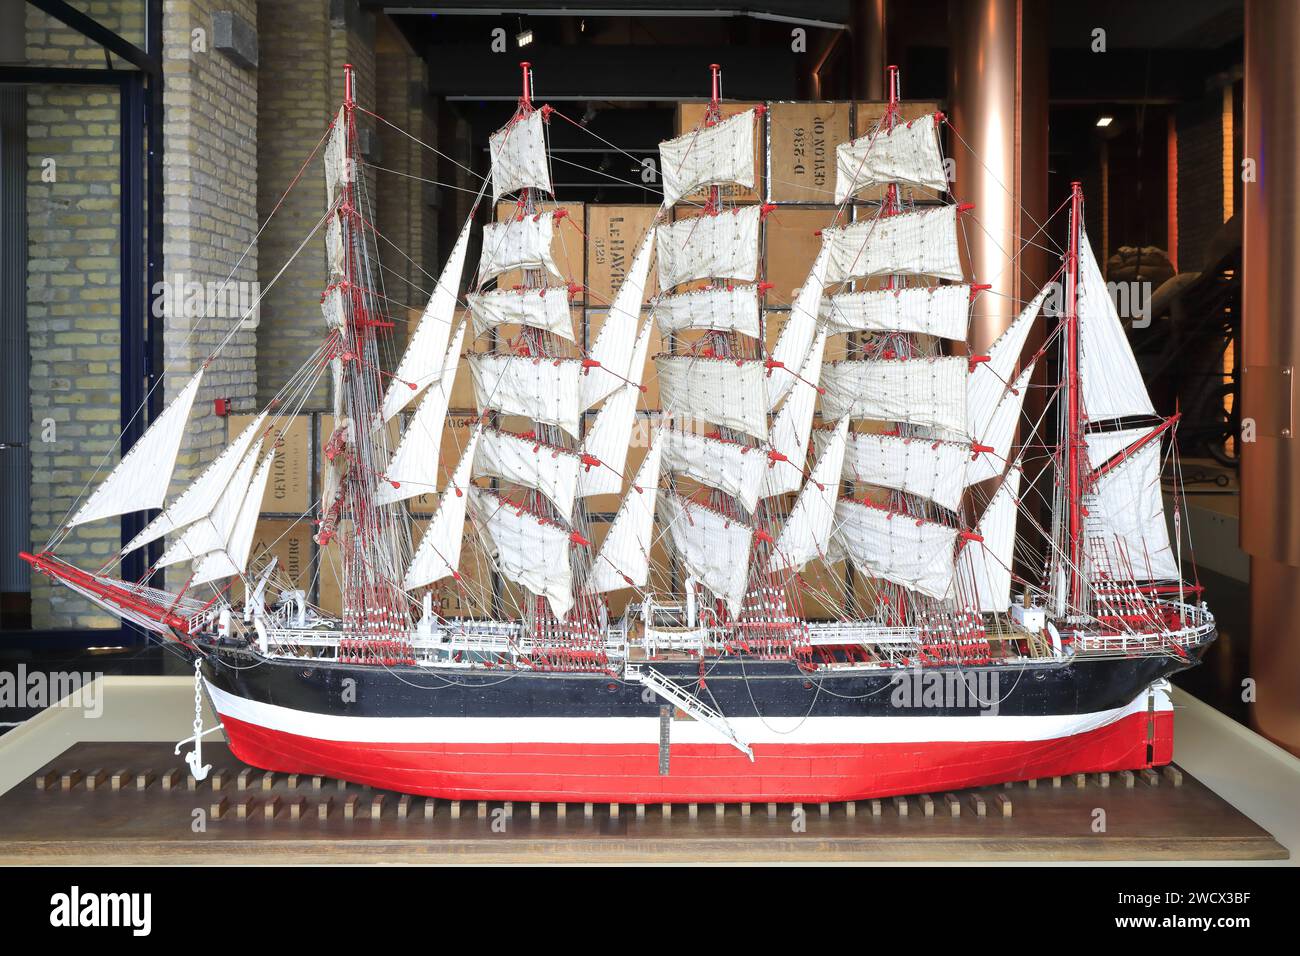 France, Nord, Dunkirk, Maritime and Port Museum, model of a 4-masted tall ship Stock Photo